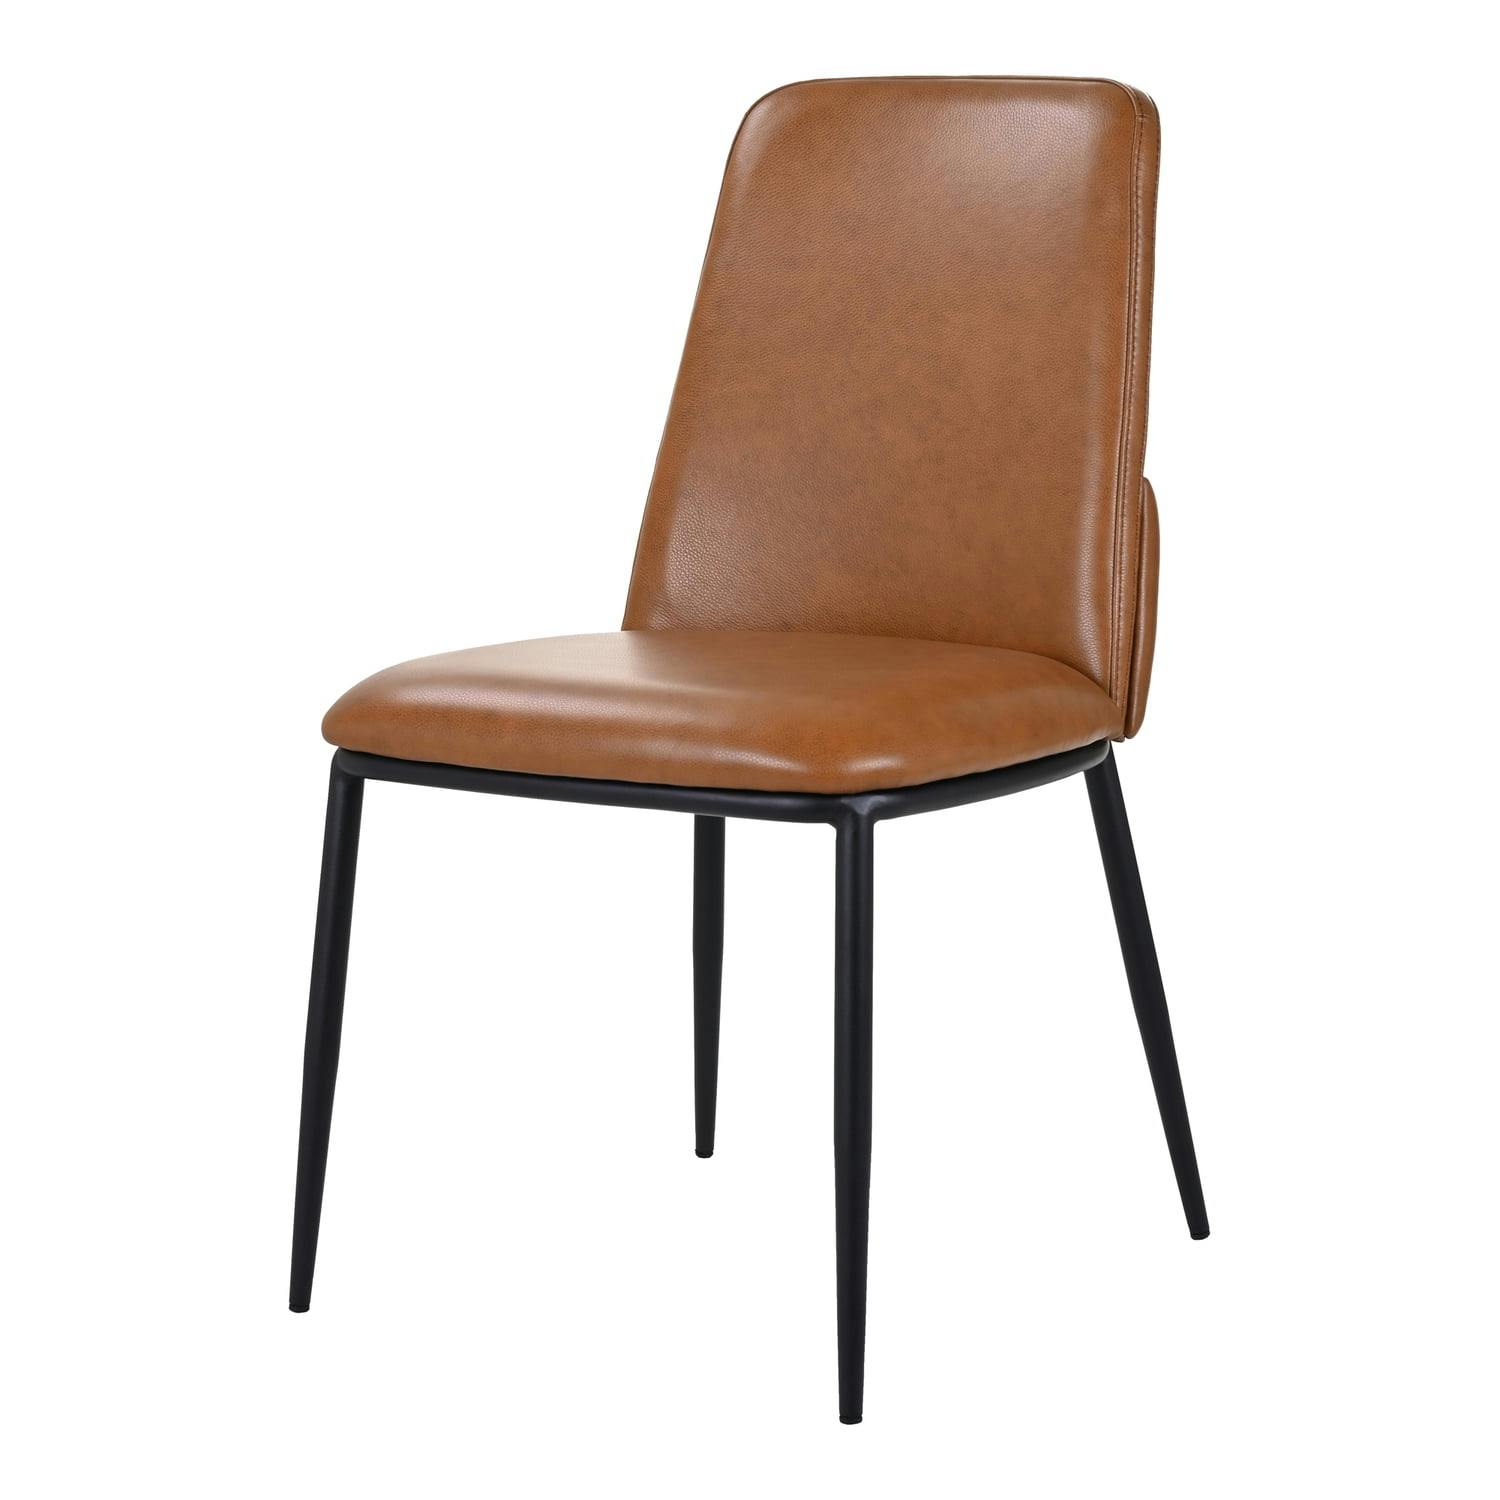 Douglas Modern High-Back Brown Leather Dining Chair